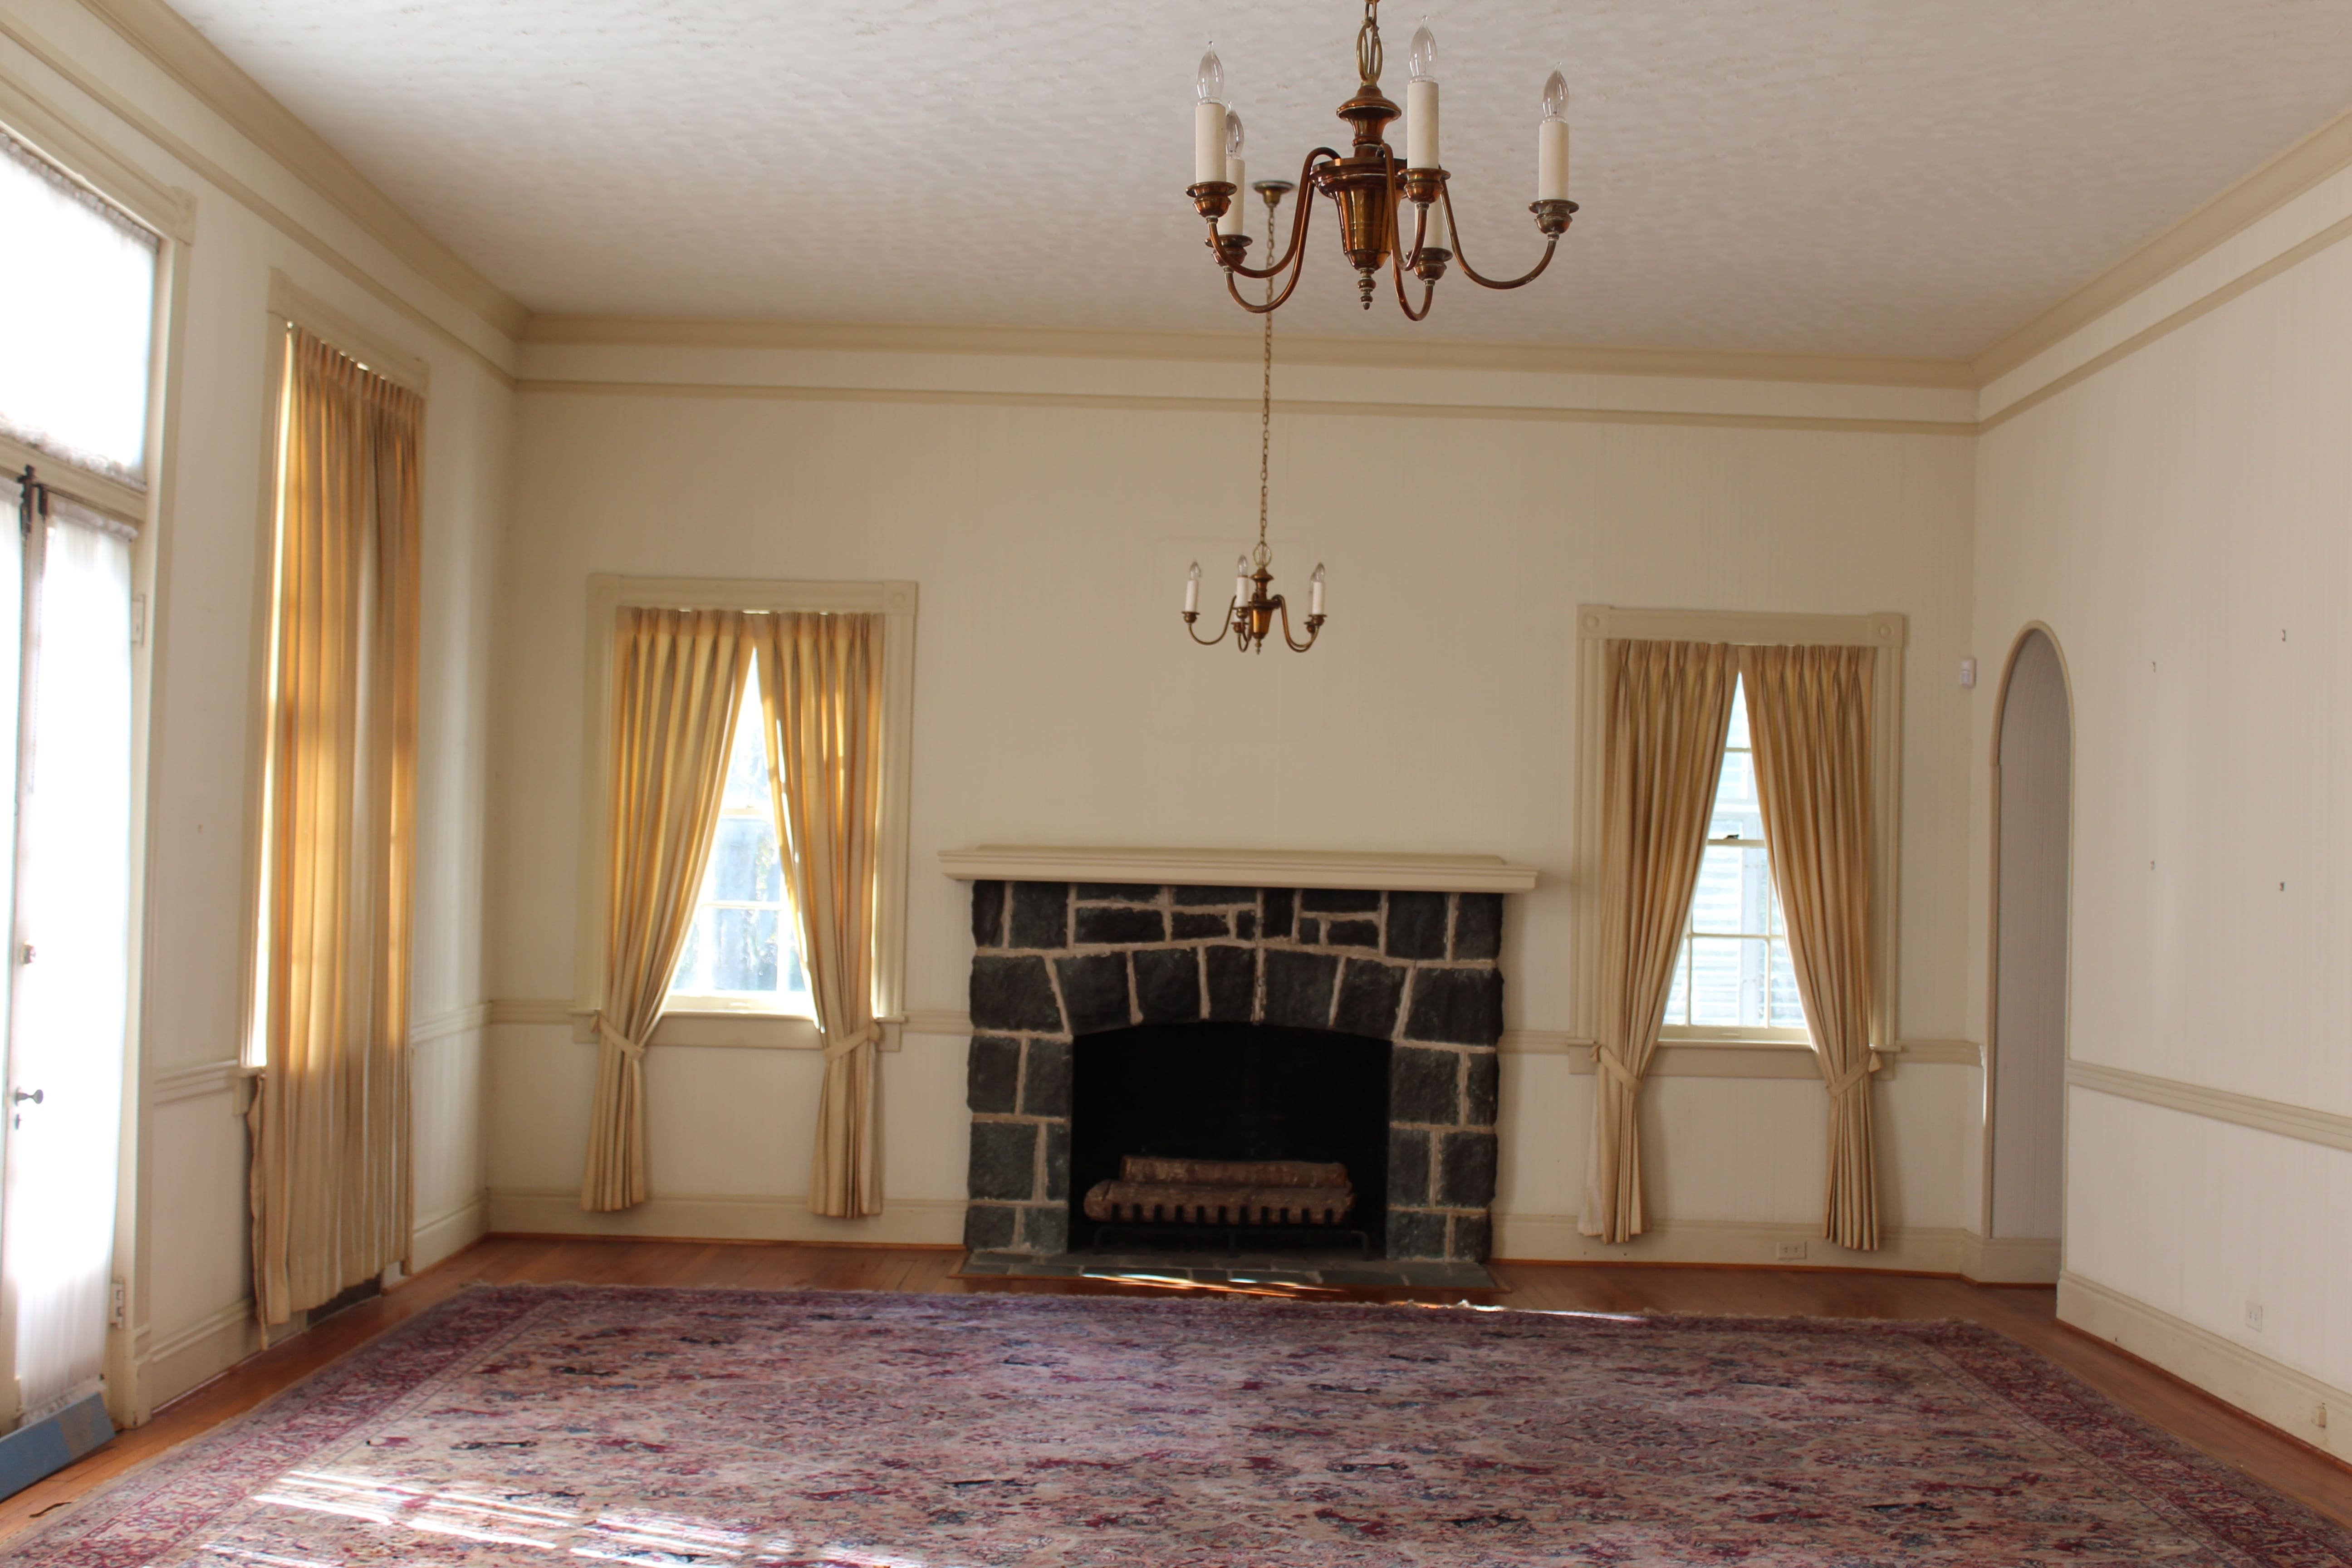 Interior of the front room (Fall 2018)